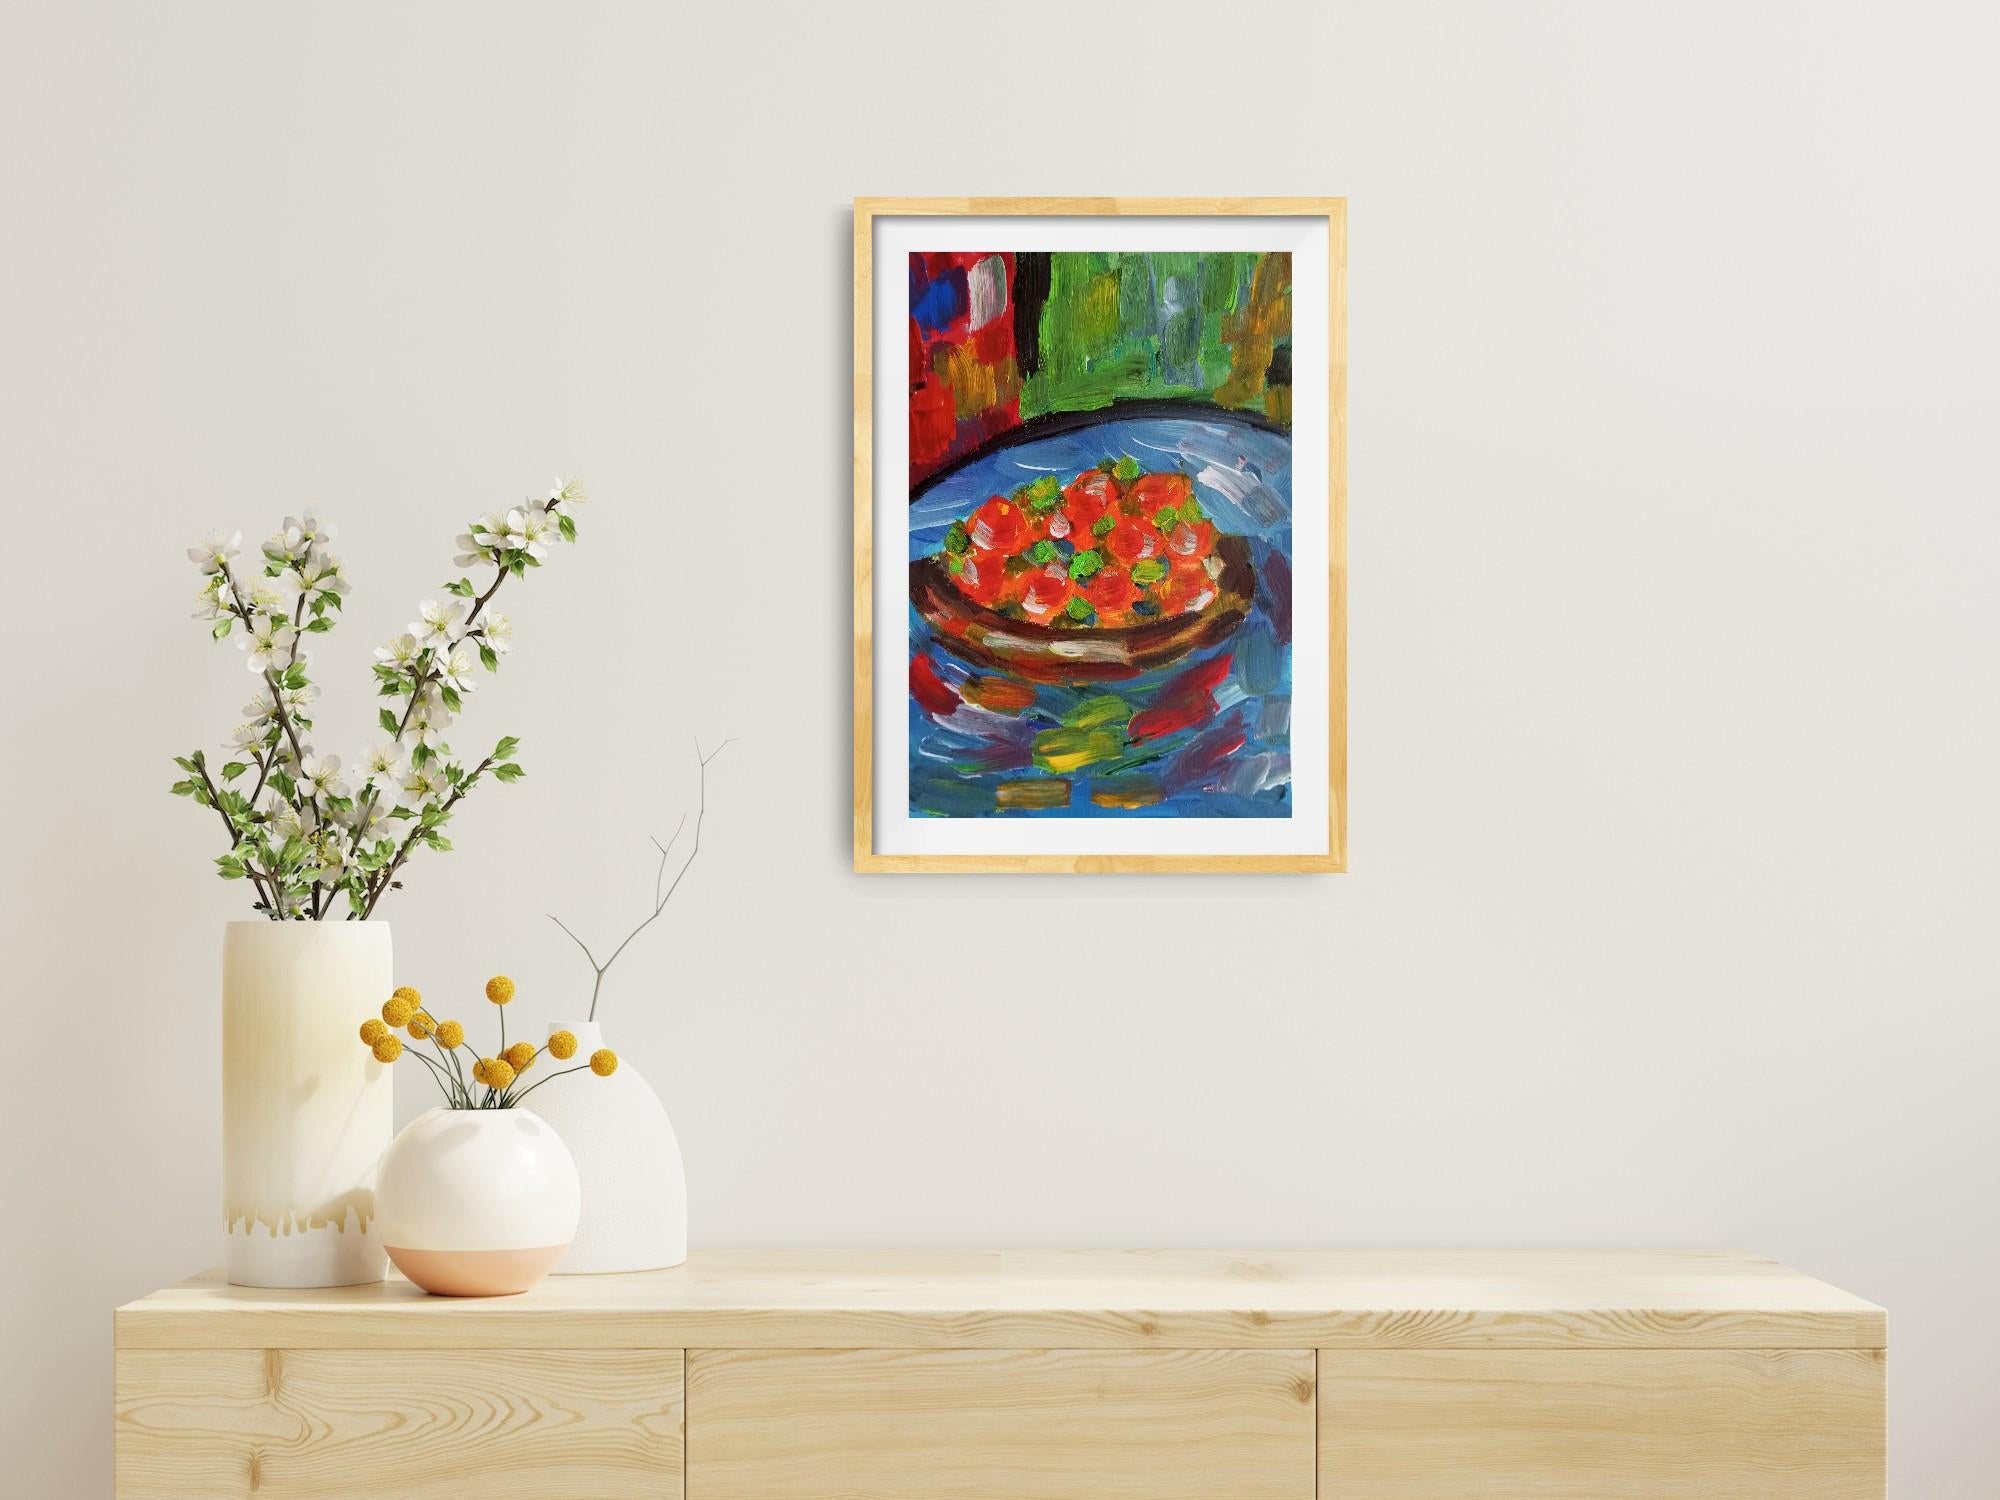 
In this floral artwork I experience the world of nature through the bright colors of a summer period.

While painting, I sought to capture the beauty of summer fruits which are full of different colors.

In my art practice I love to use bright